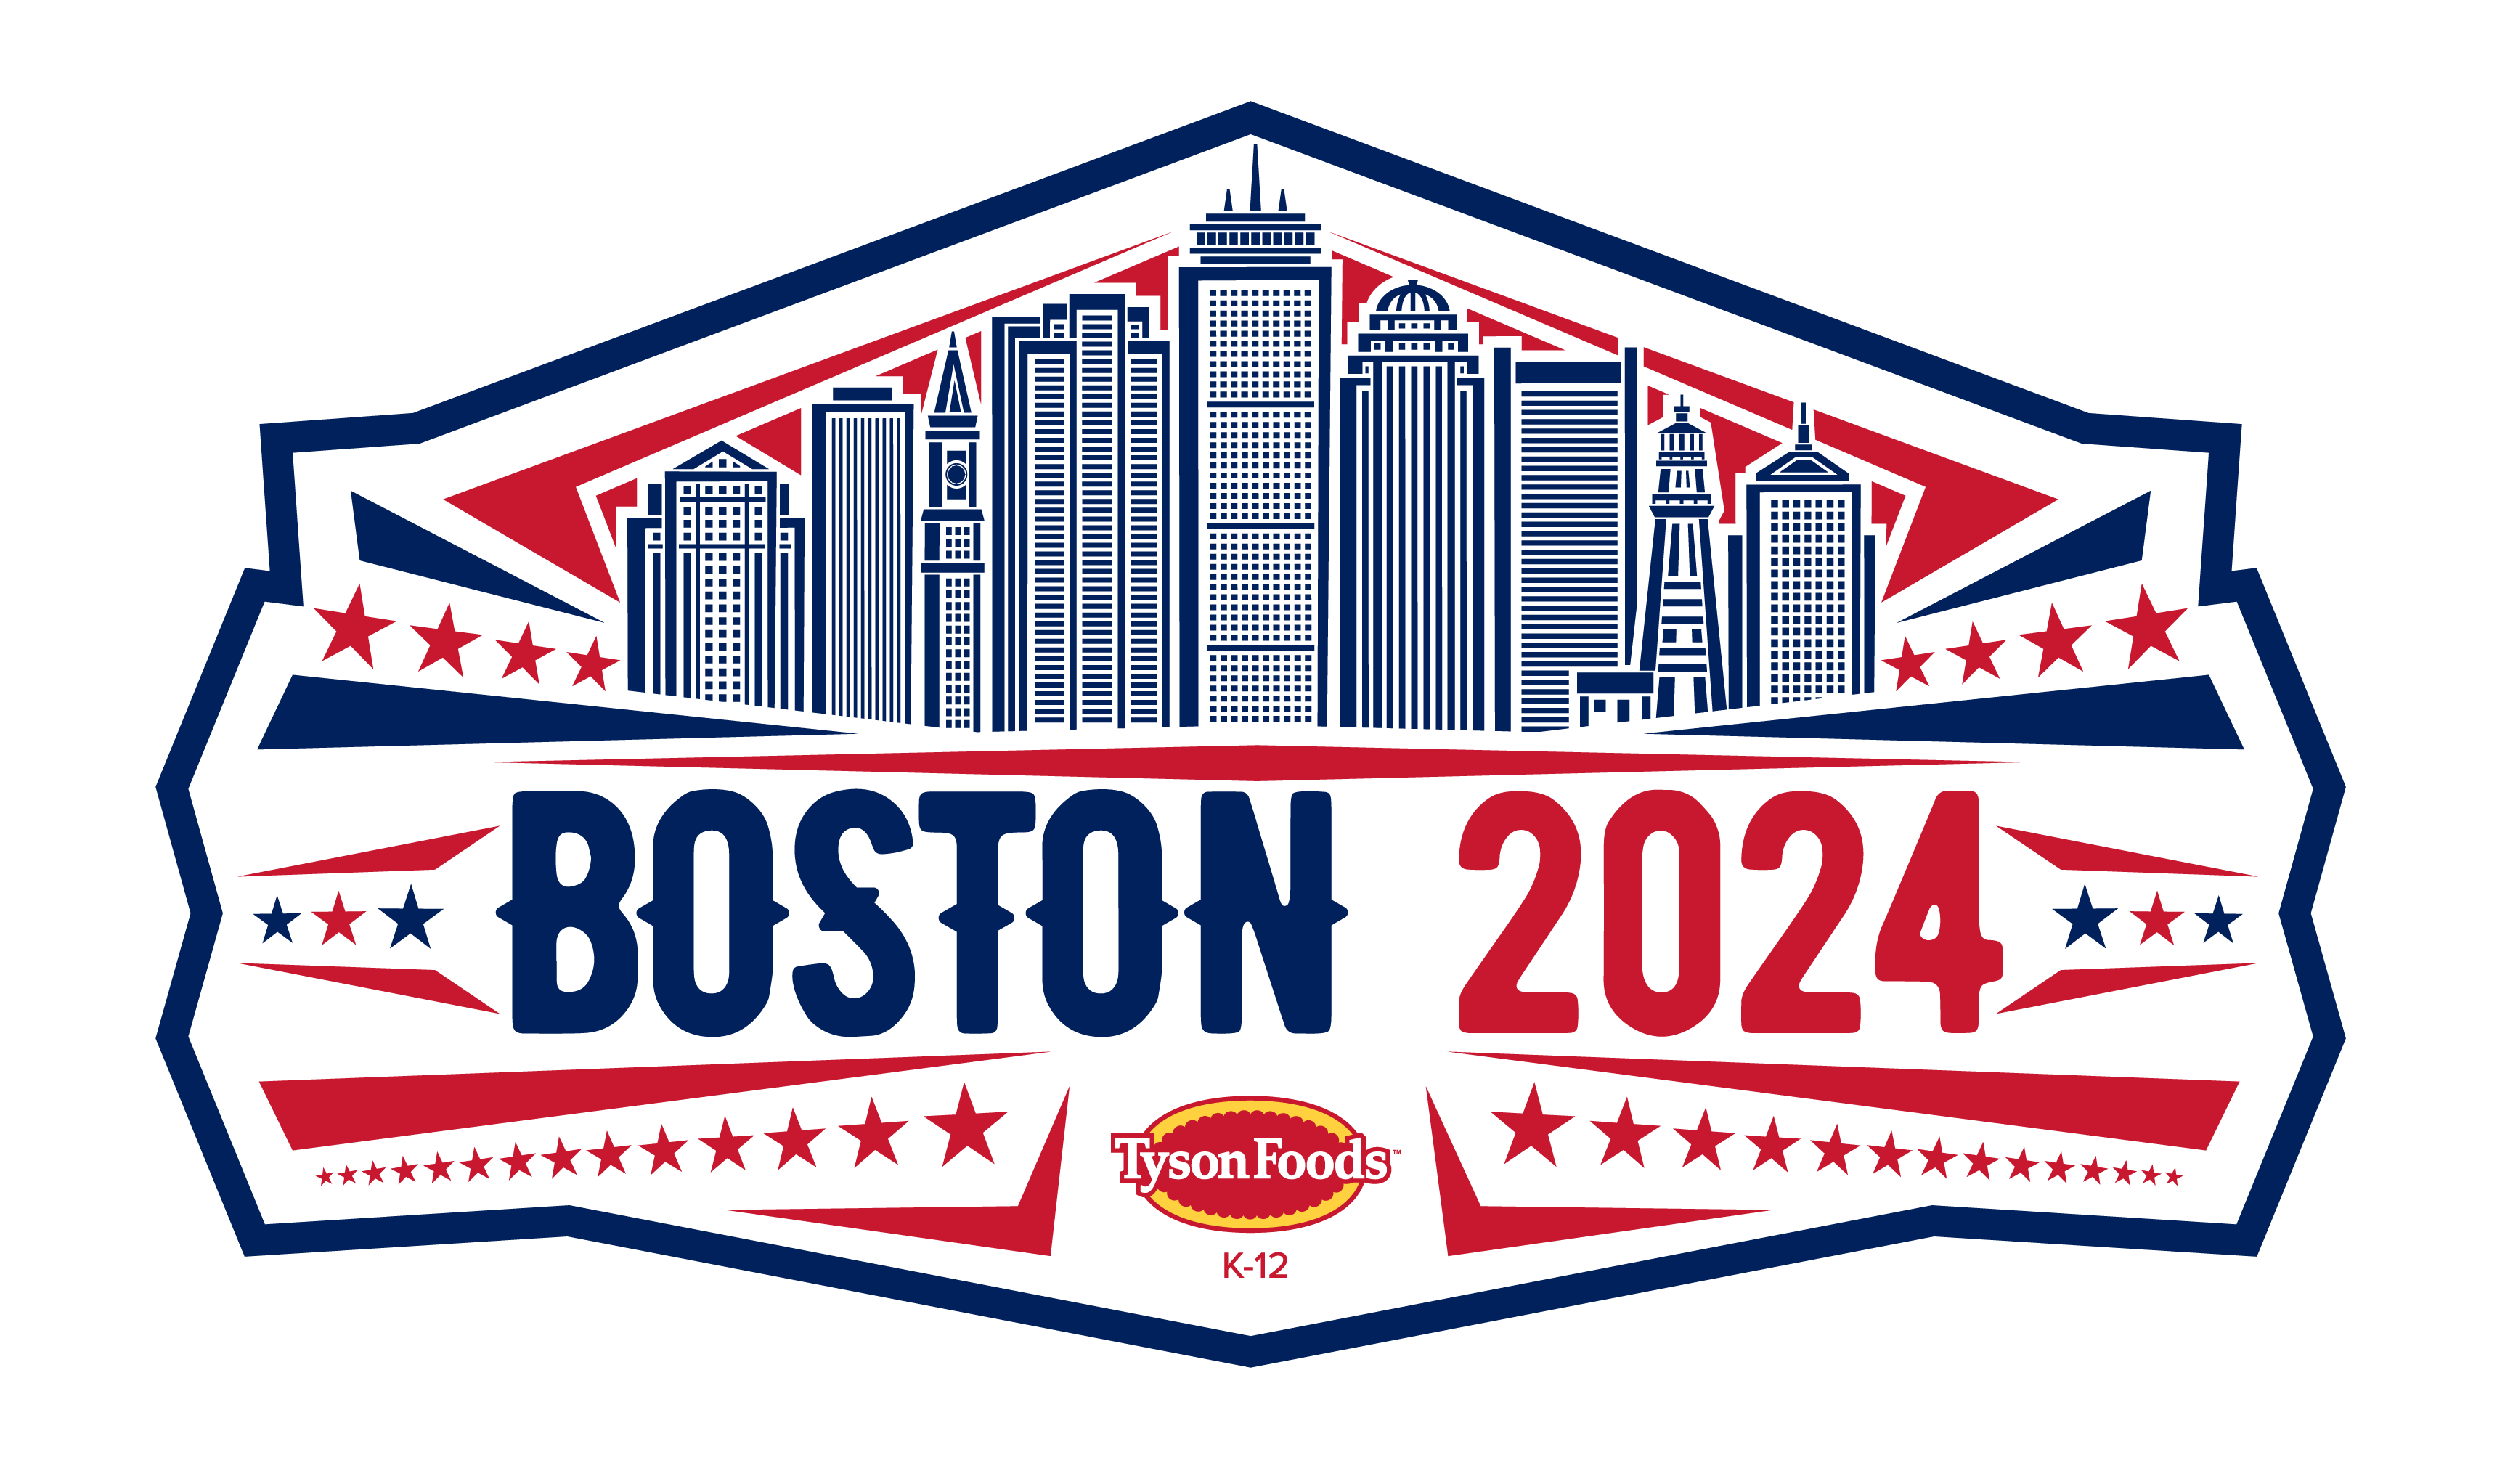 Boston buildings image with Boston 2024 and Tyson Foods 5-12 Logo